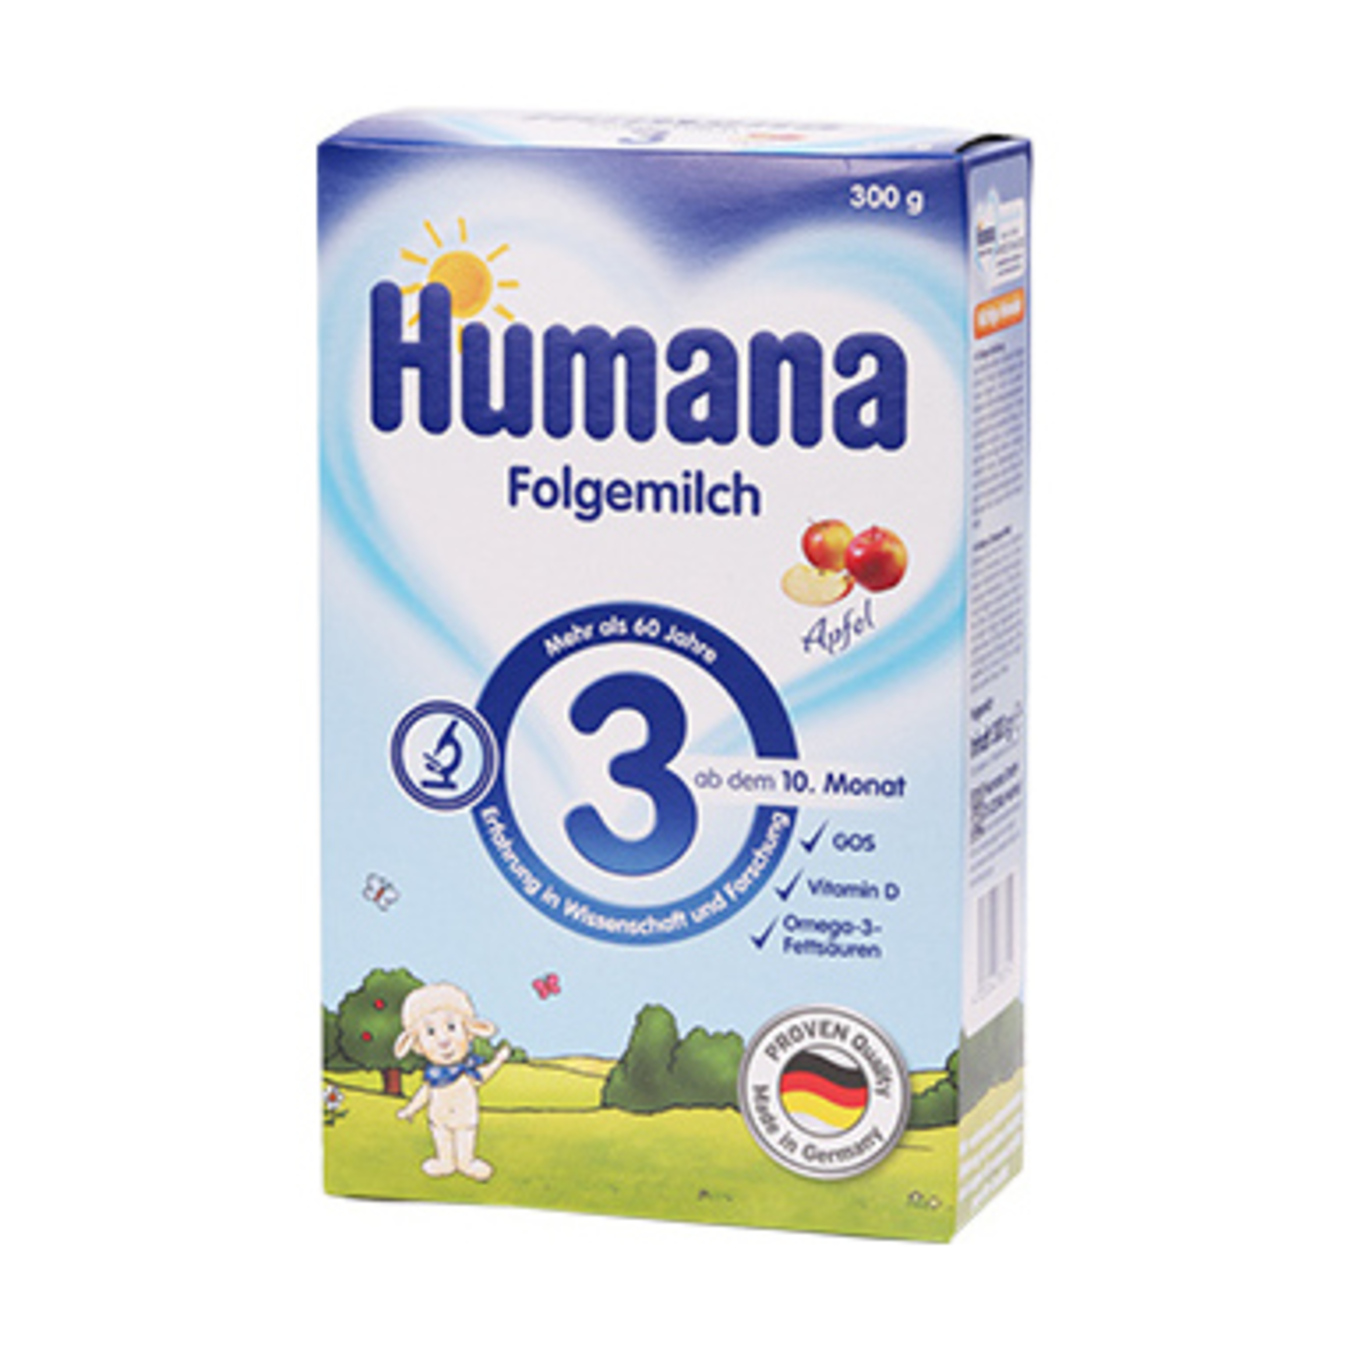 Mixture Humana Folgemilch 3 Dry Milk from 10 months 600g